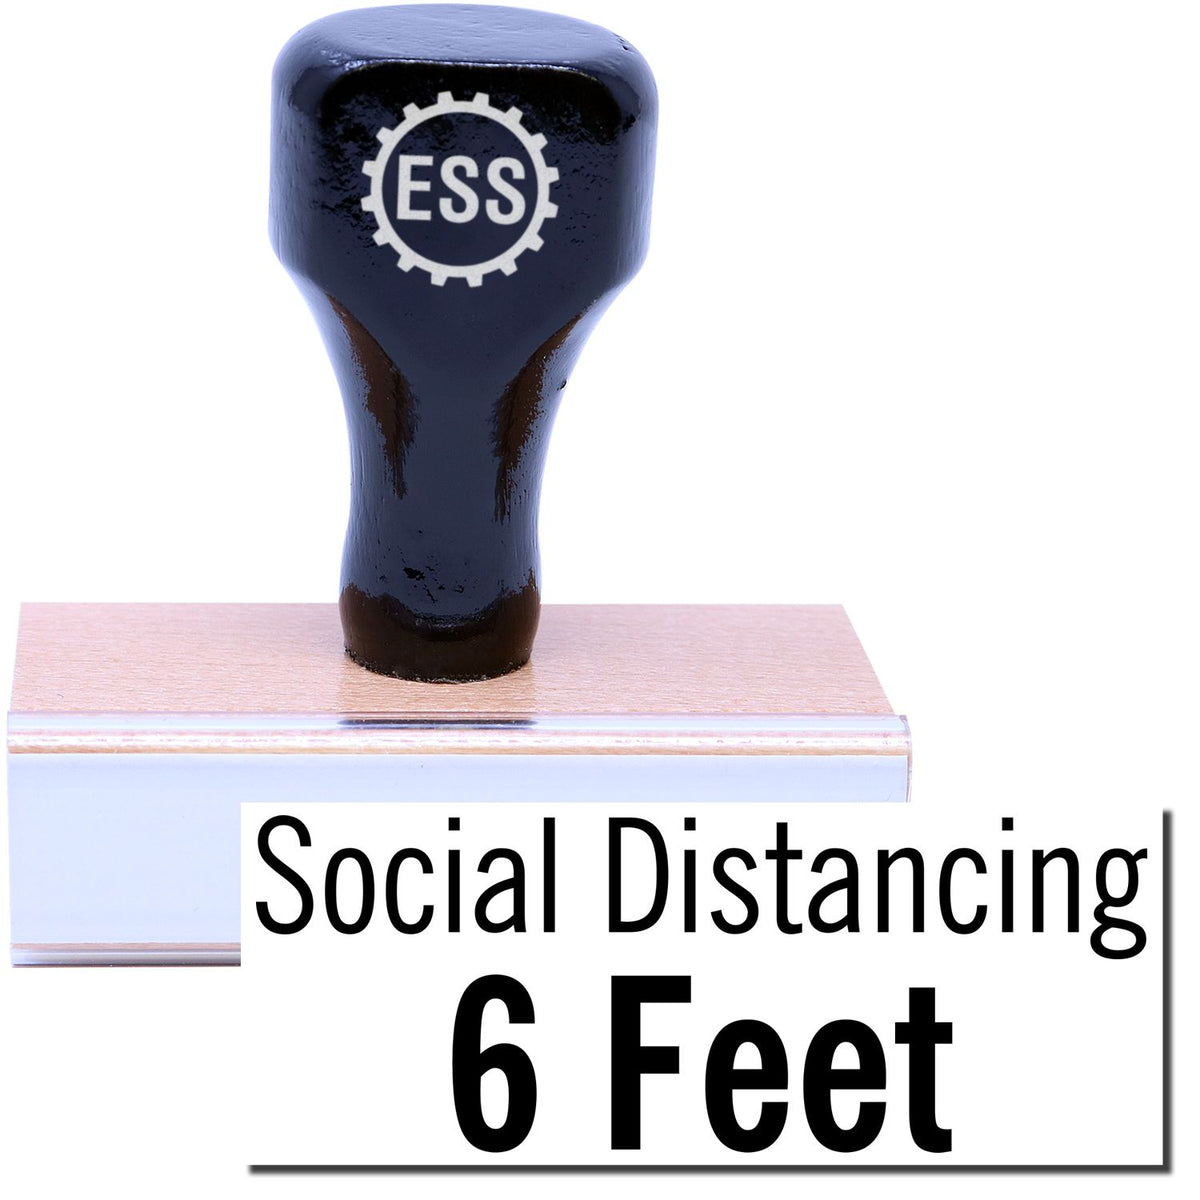 A stock office rubber stamp with a stamped image showing how the text &quot;Social Distancing 6 Feet&quot; in a large font is displayed after stamping.